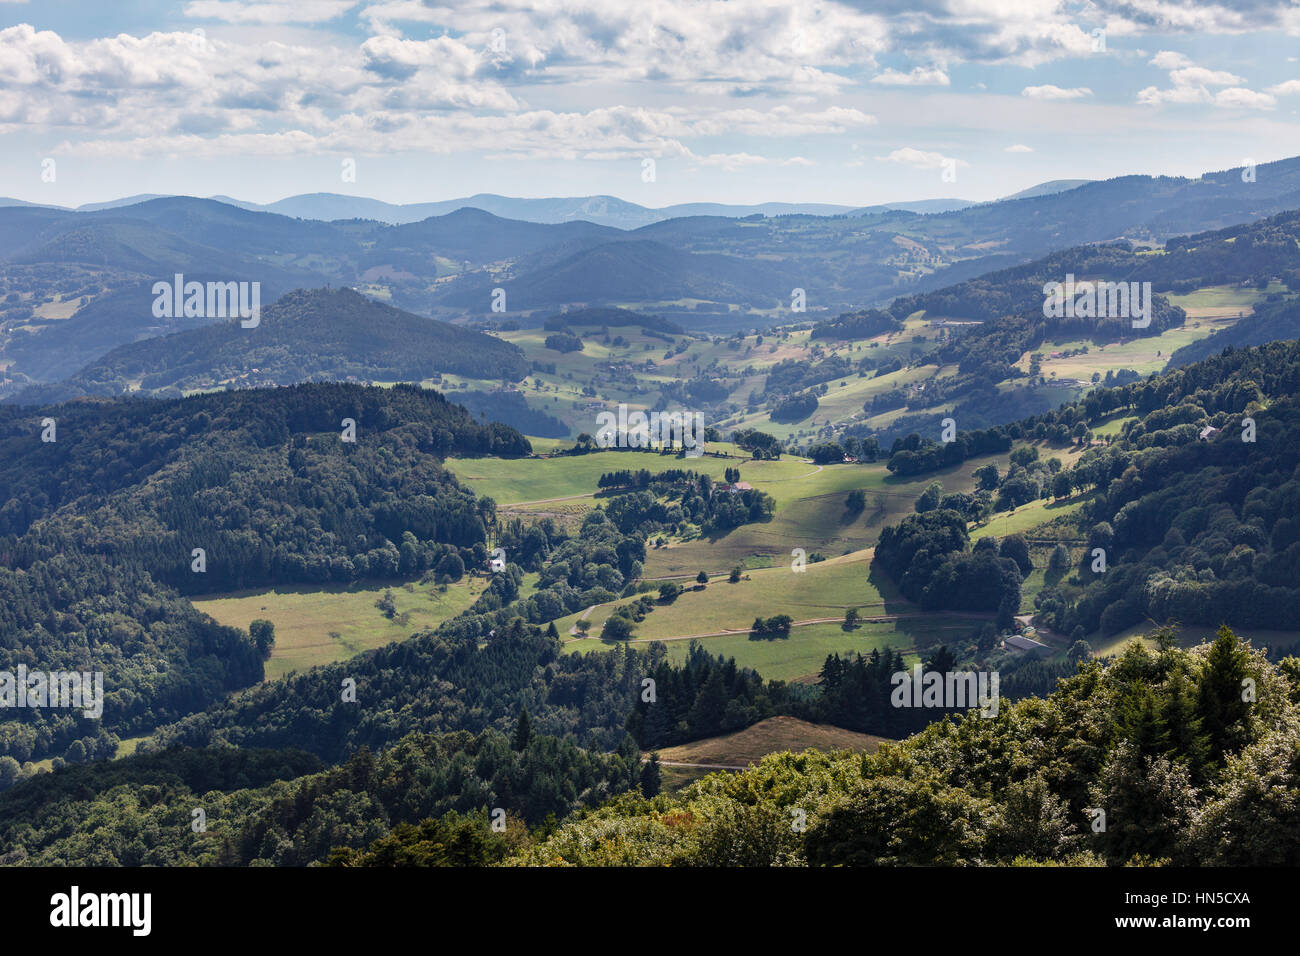 View In The Ballons Des Vosges Regional Nature Park Near Freland Stock Photo Alamy